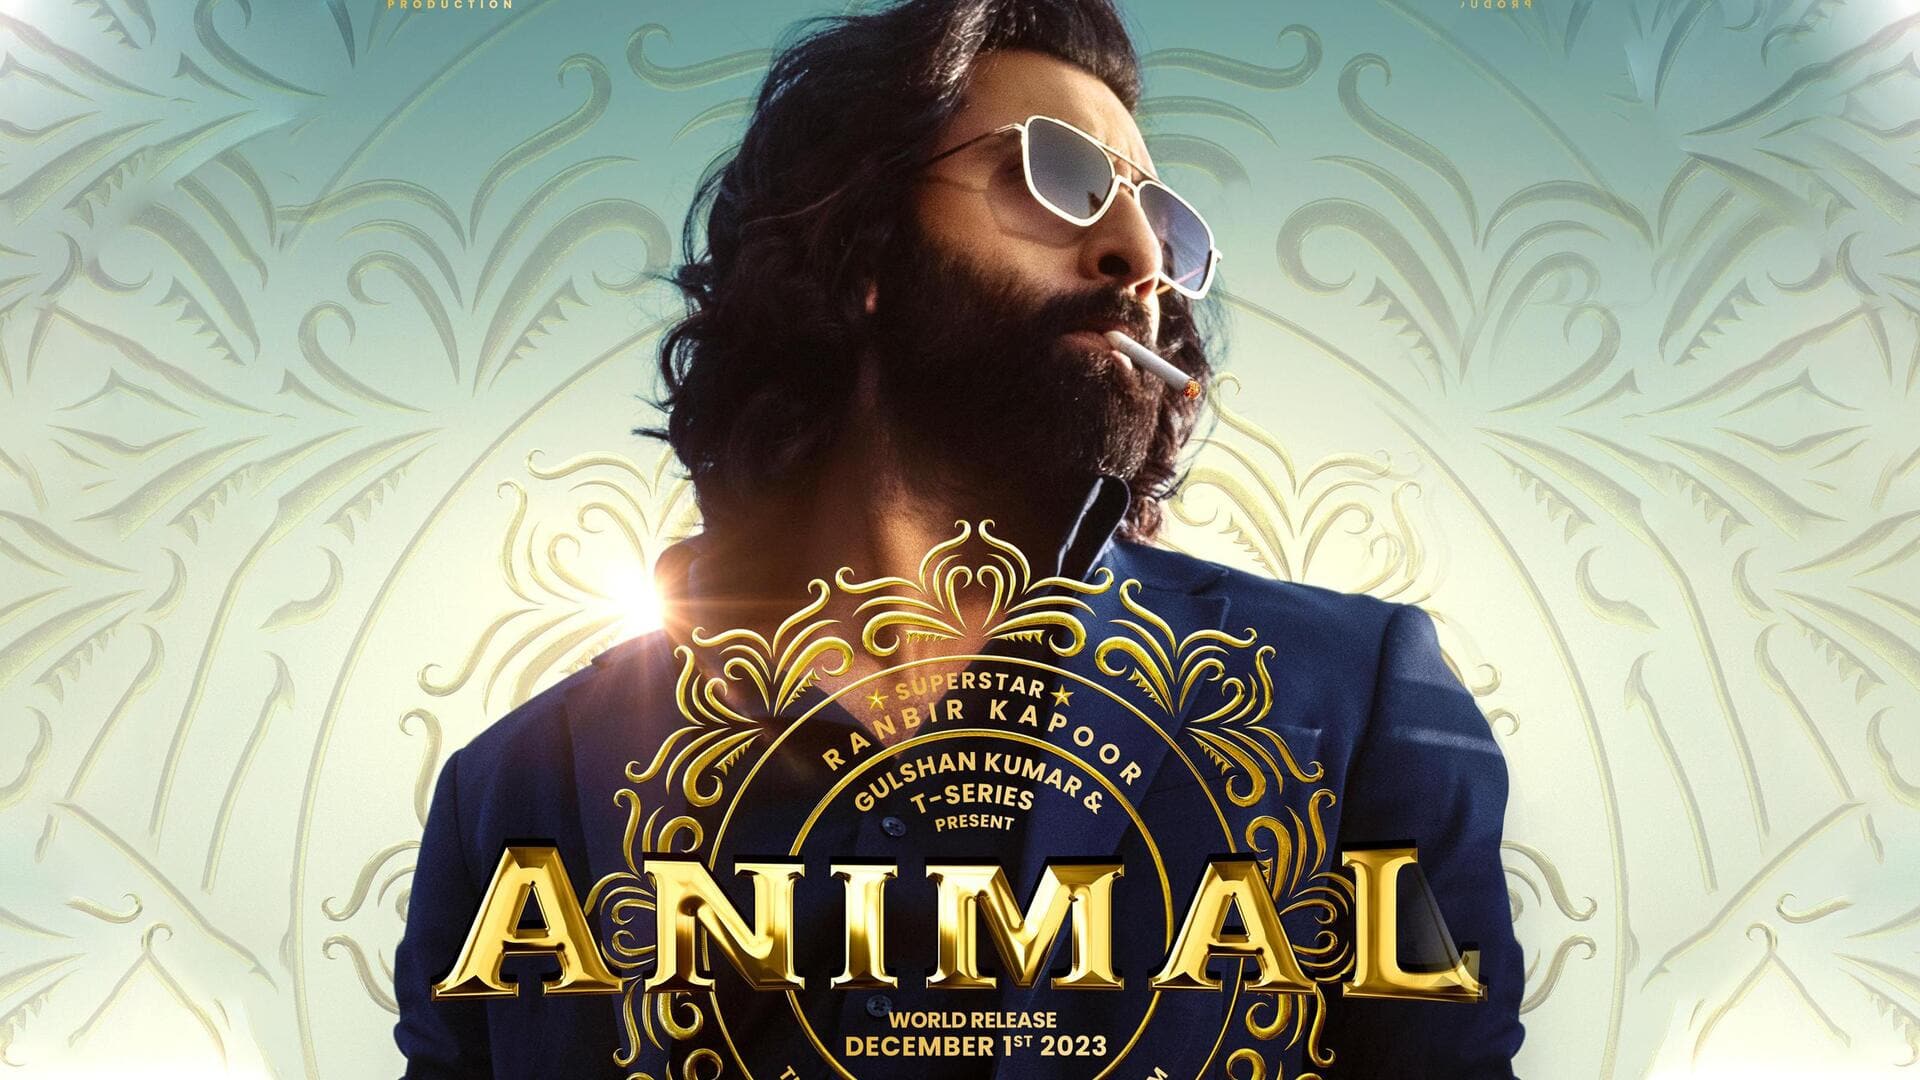 'Animal' records 5th largest advance booking haul; sells 4.56L tickets